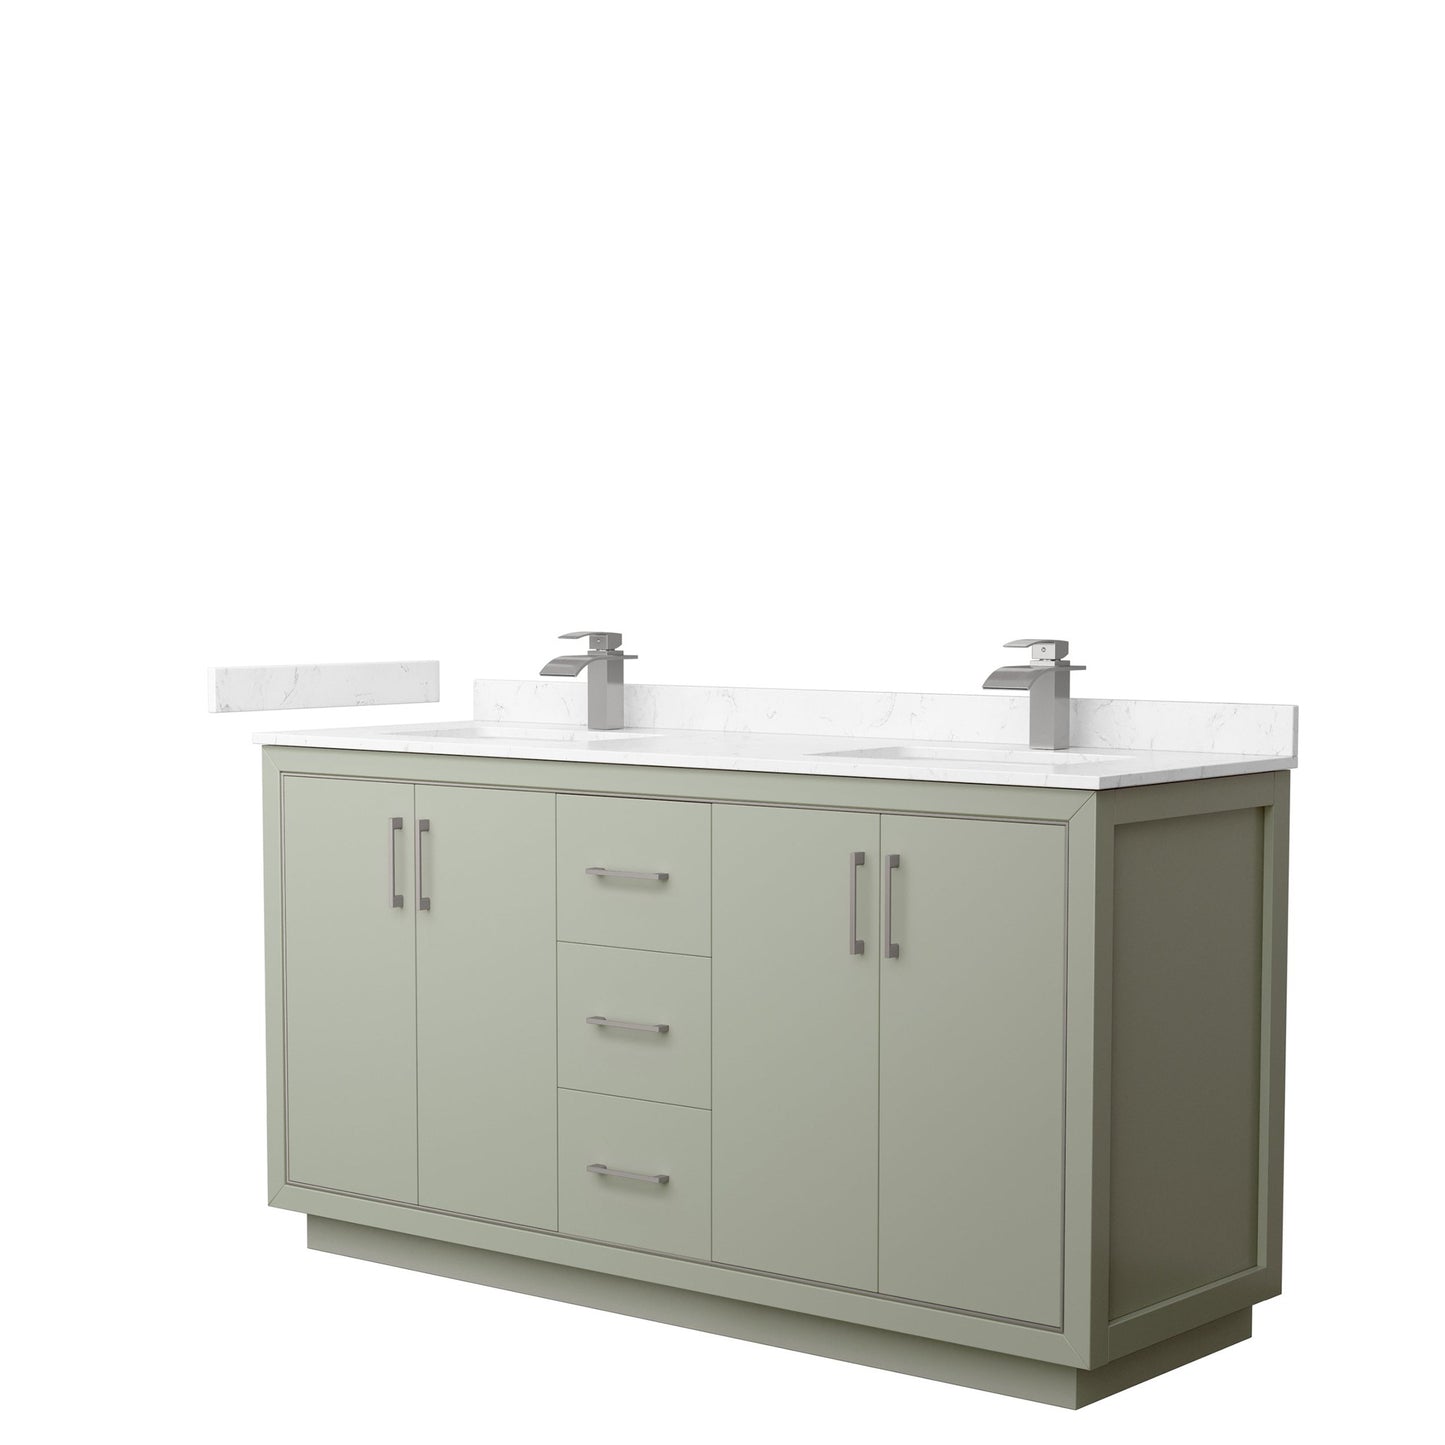 Wyndham Collection Icon 66" Double Bathroom Vanity in Light Green, Carrara Cultured Marble Countertop, Undermount Square Sinks, Brushed Nickel Trim